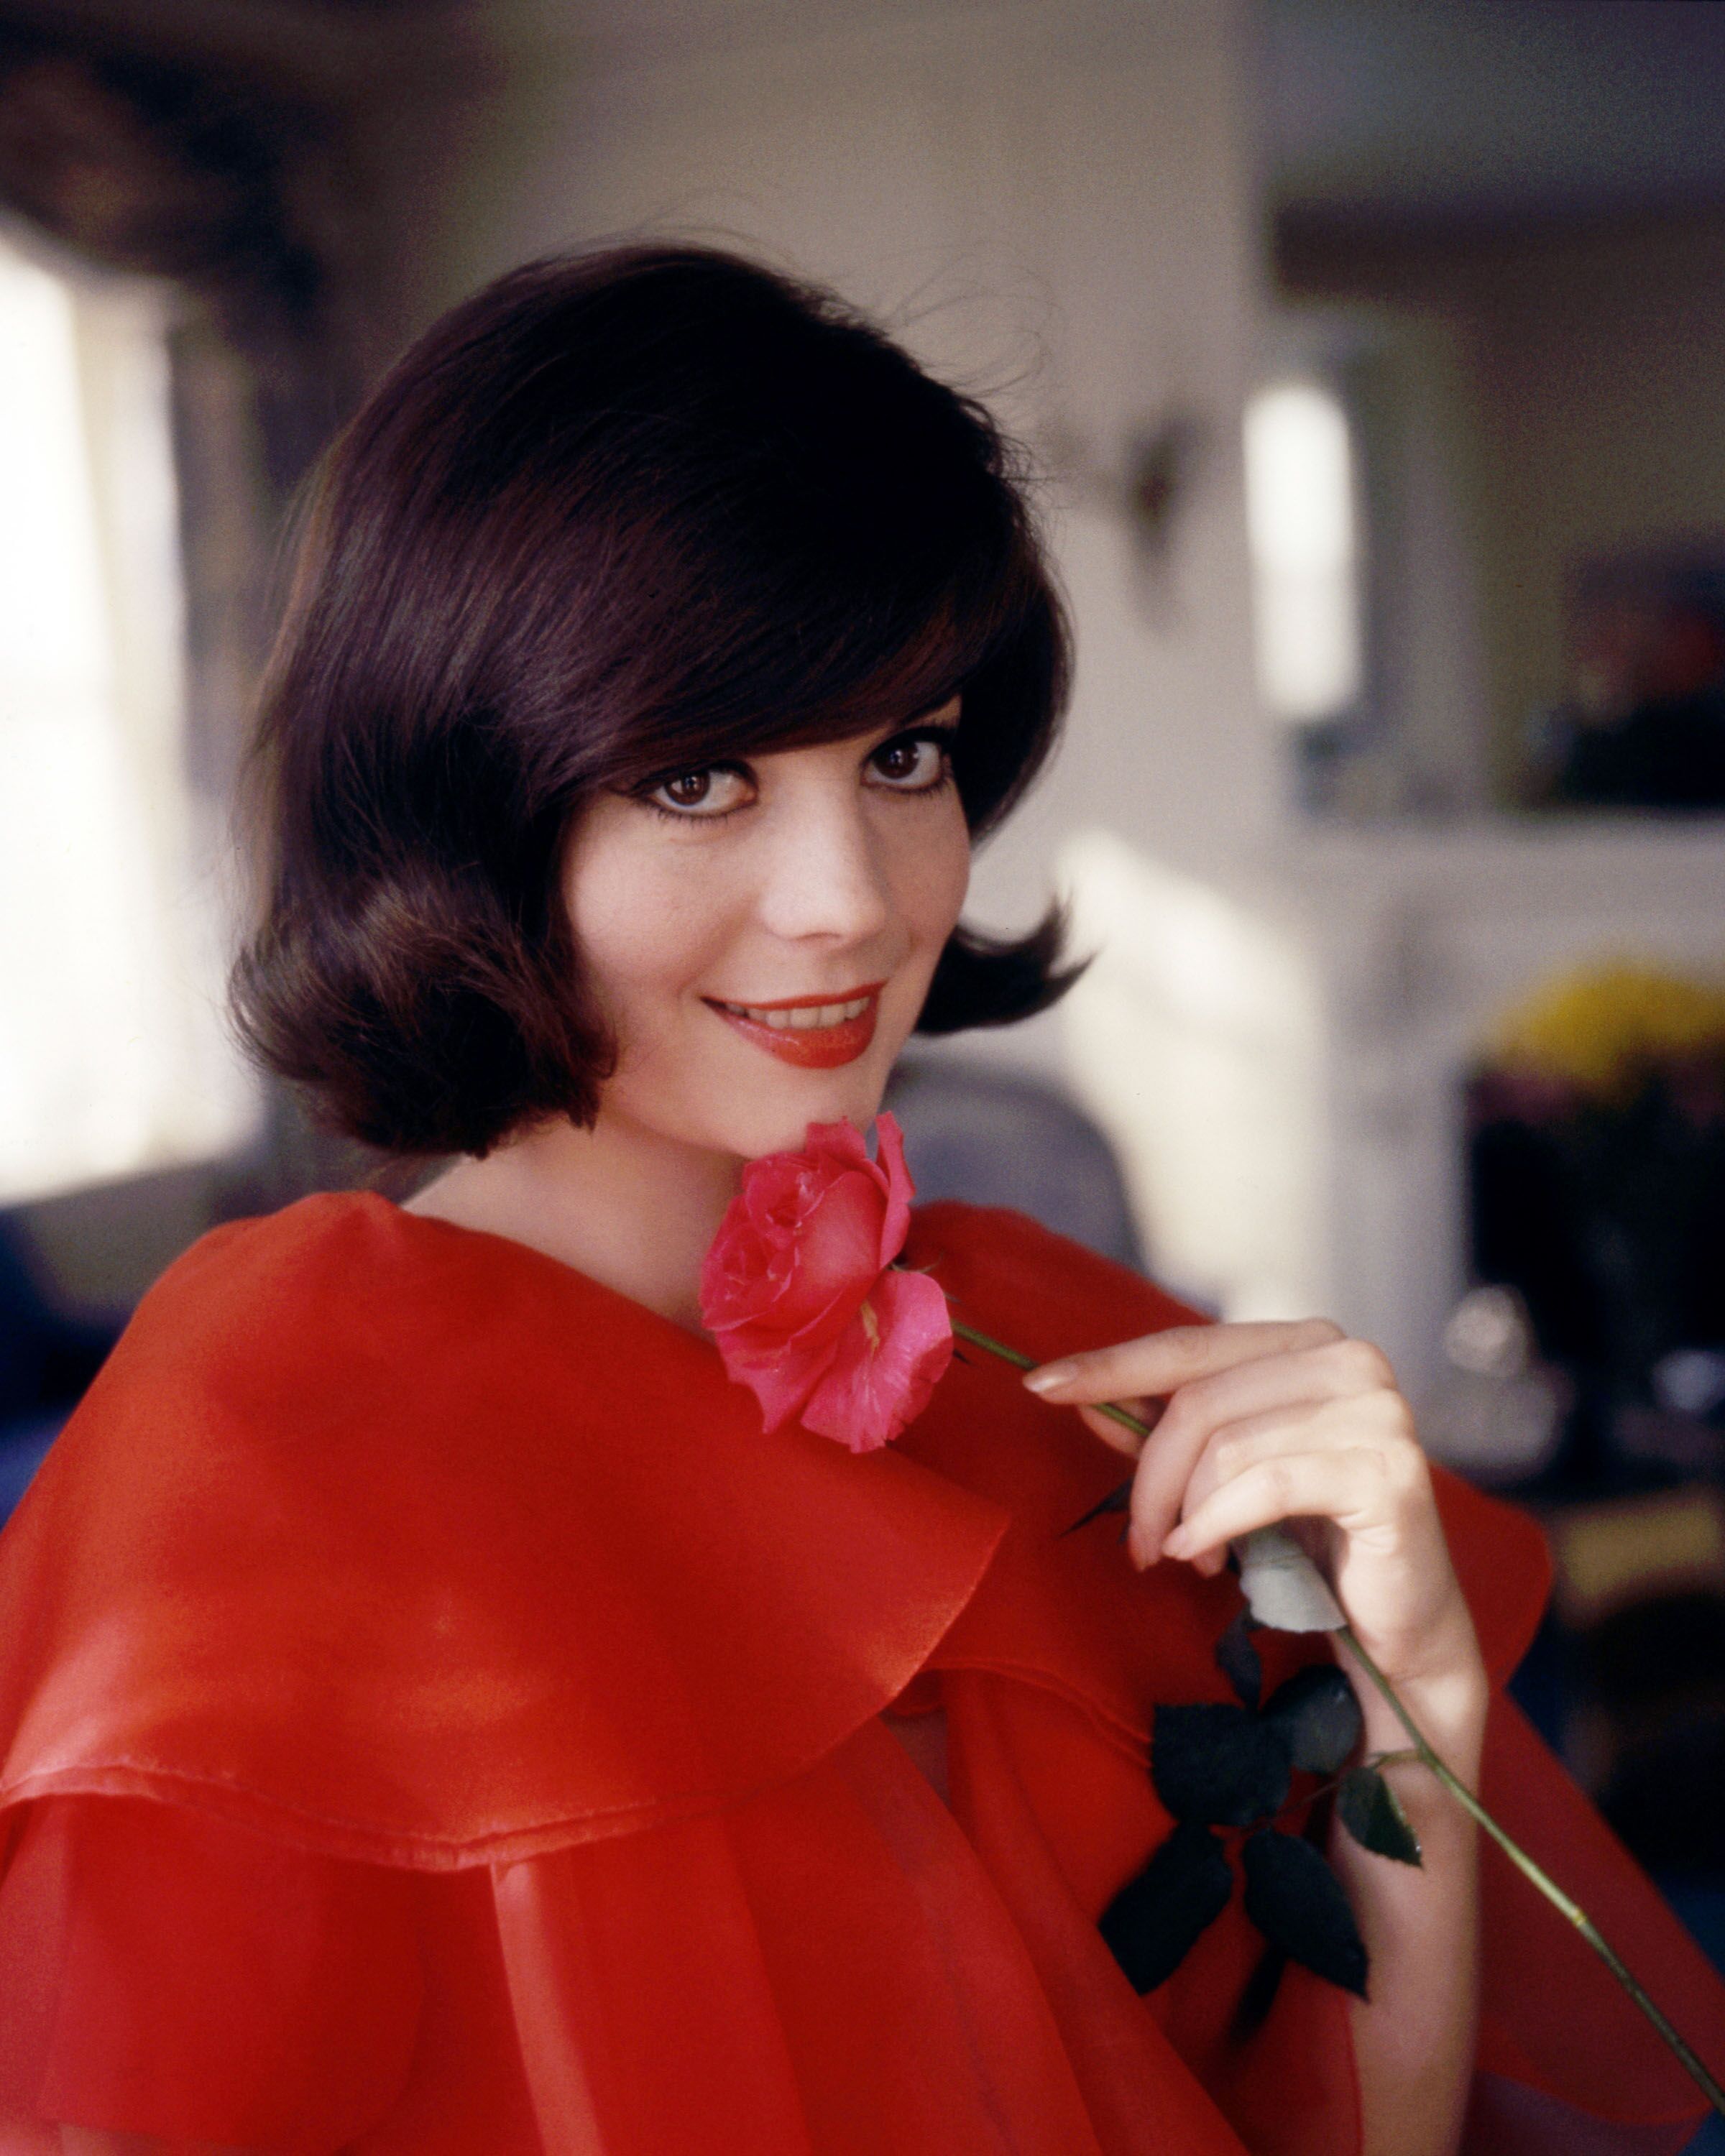 Natalie Wood (1938-1981), US actress, wearing a red top and holding a pink flower, in a studio portrait, against a yellow background, circa 1965. | Source: Getty Images